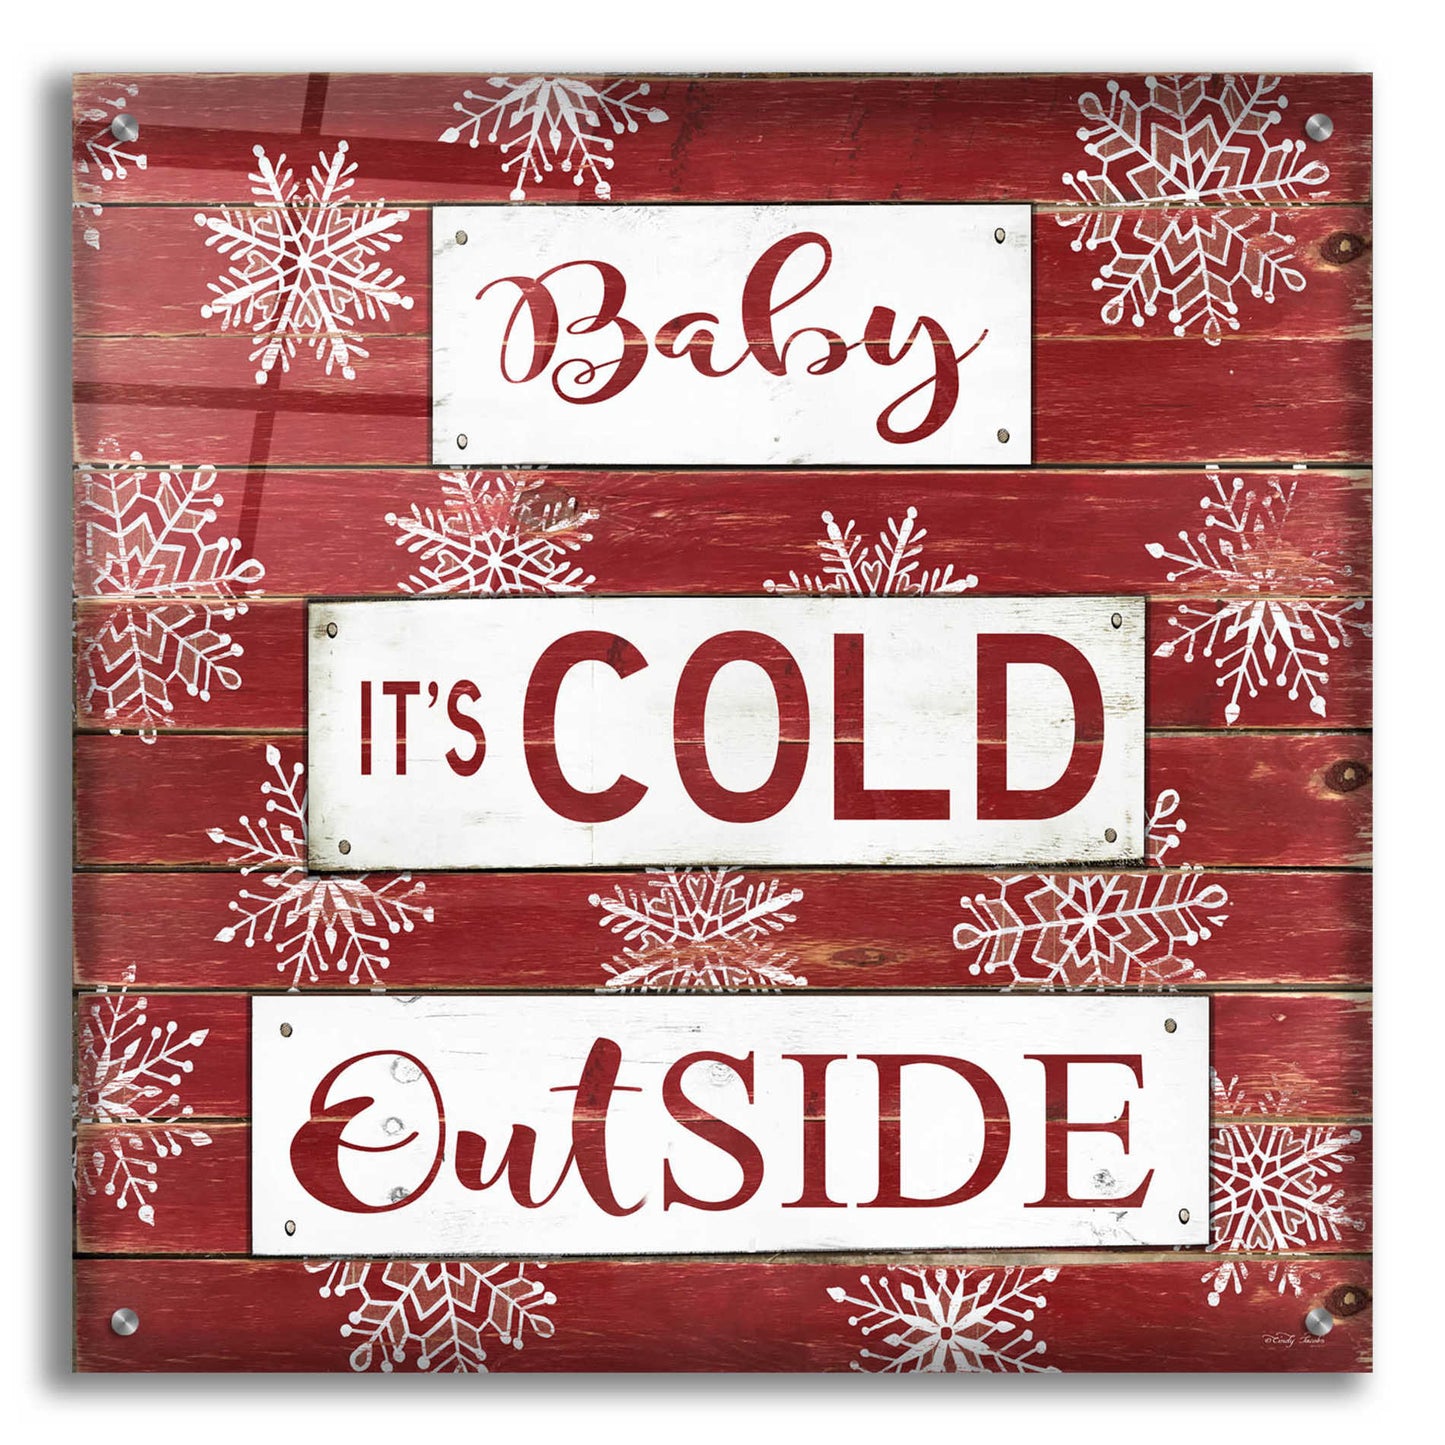 Epic Art 'Baby It's Cold Outside Red' by Cindy Jacobs, Acrylic Glass Wall Art,24x24